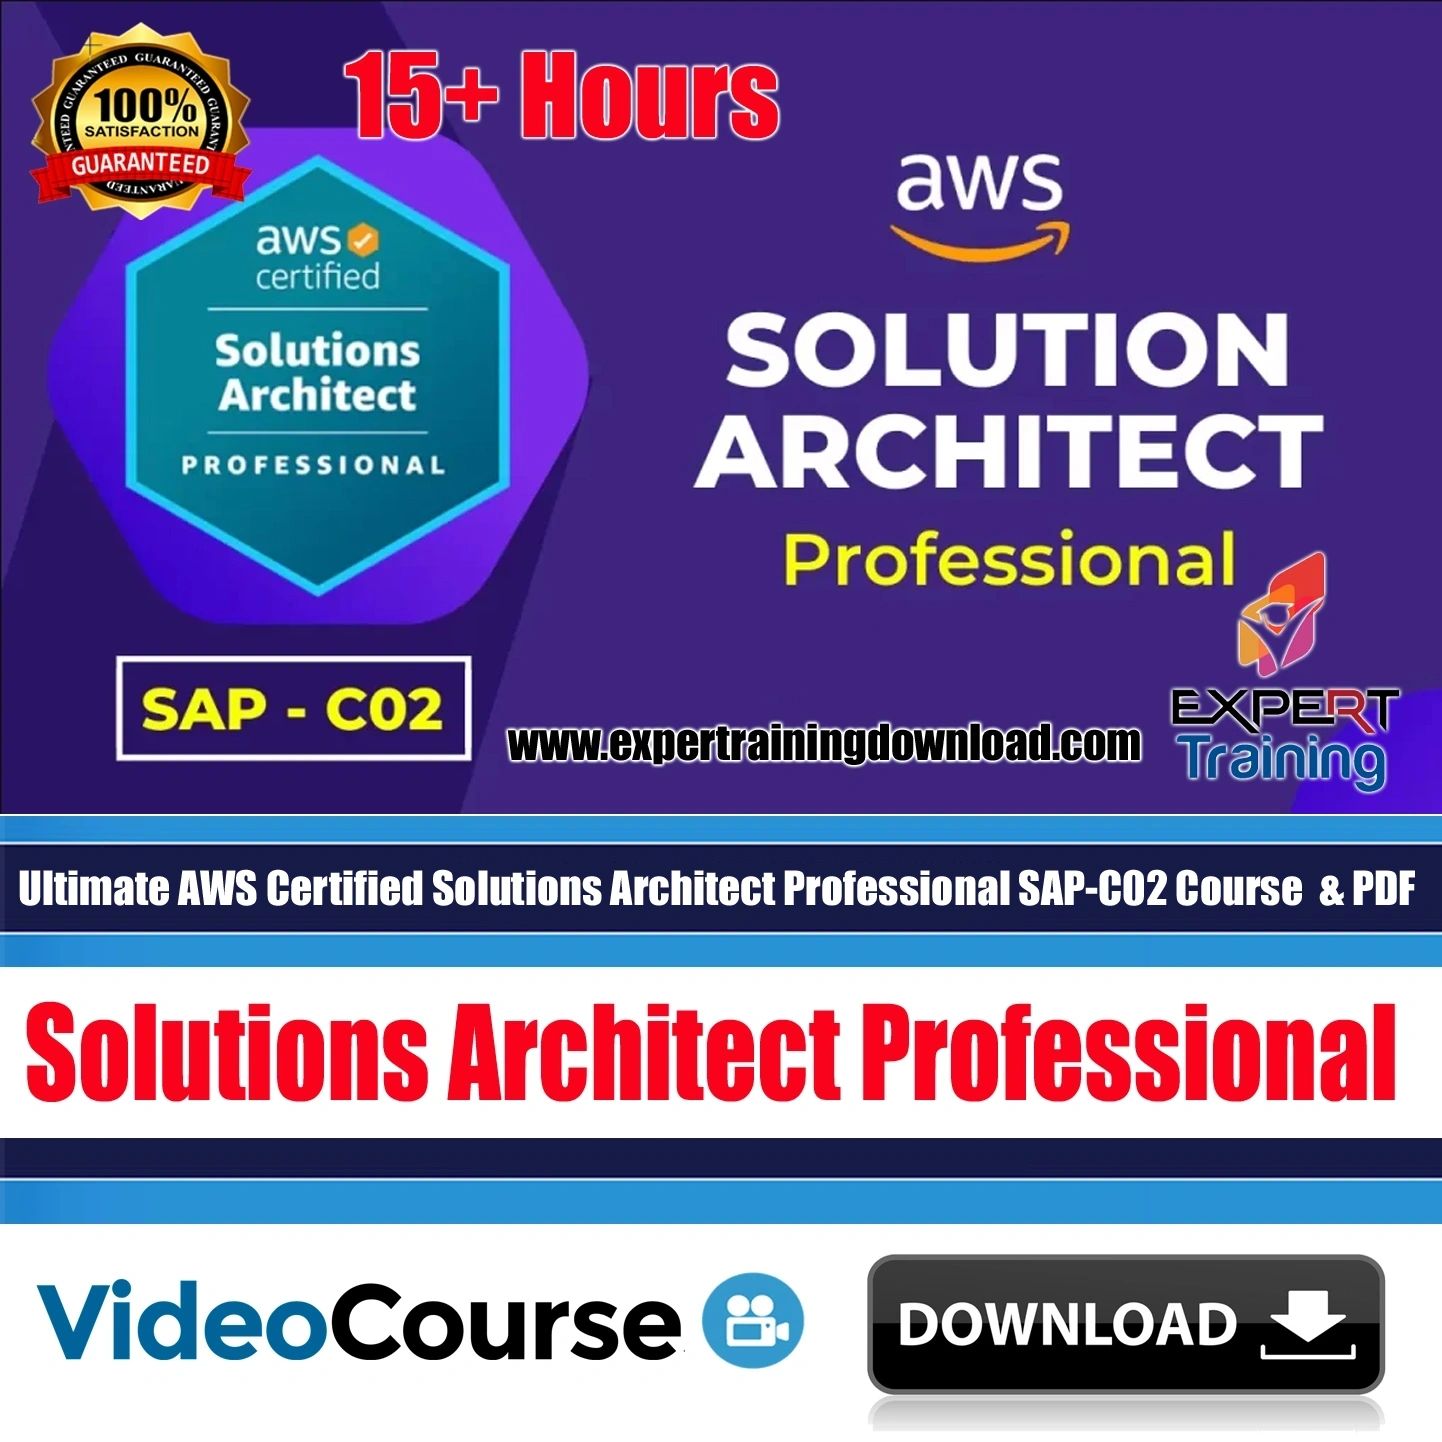 Ultimate AWS Certified Solutions Architect Professional SAP-C02 Course & PDF Guides